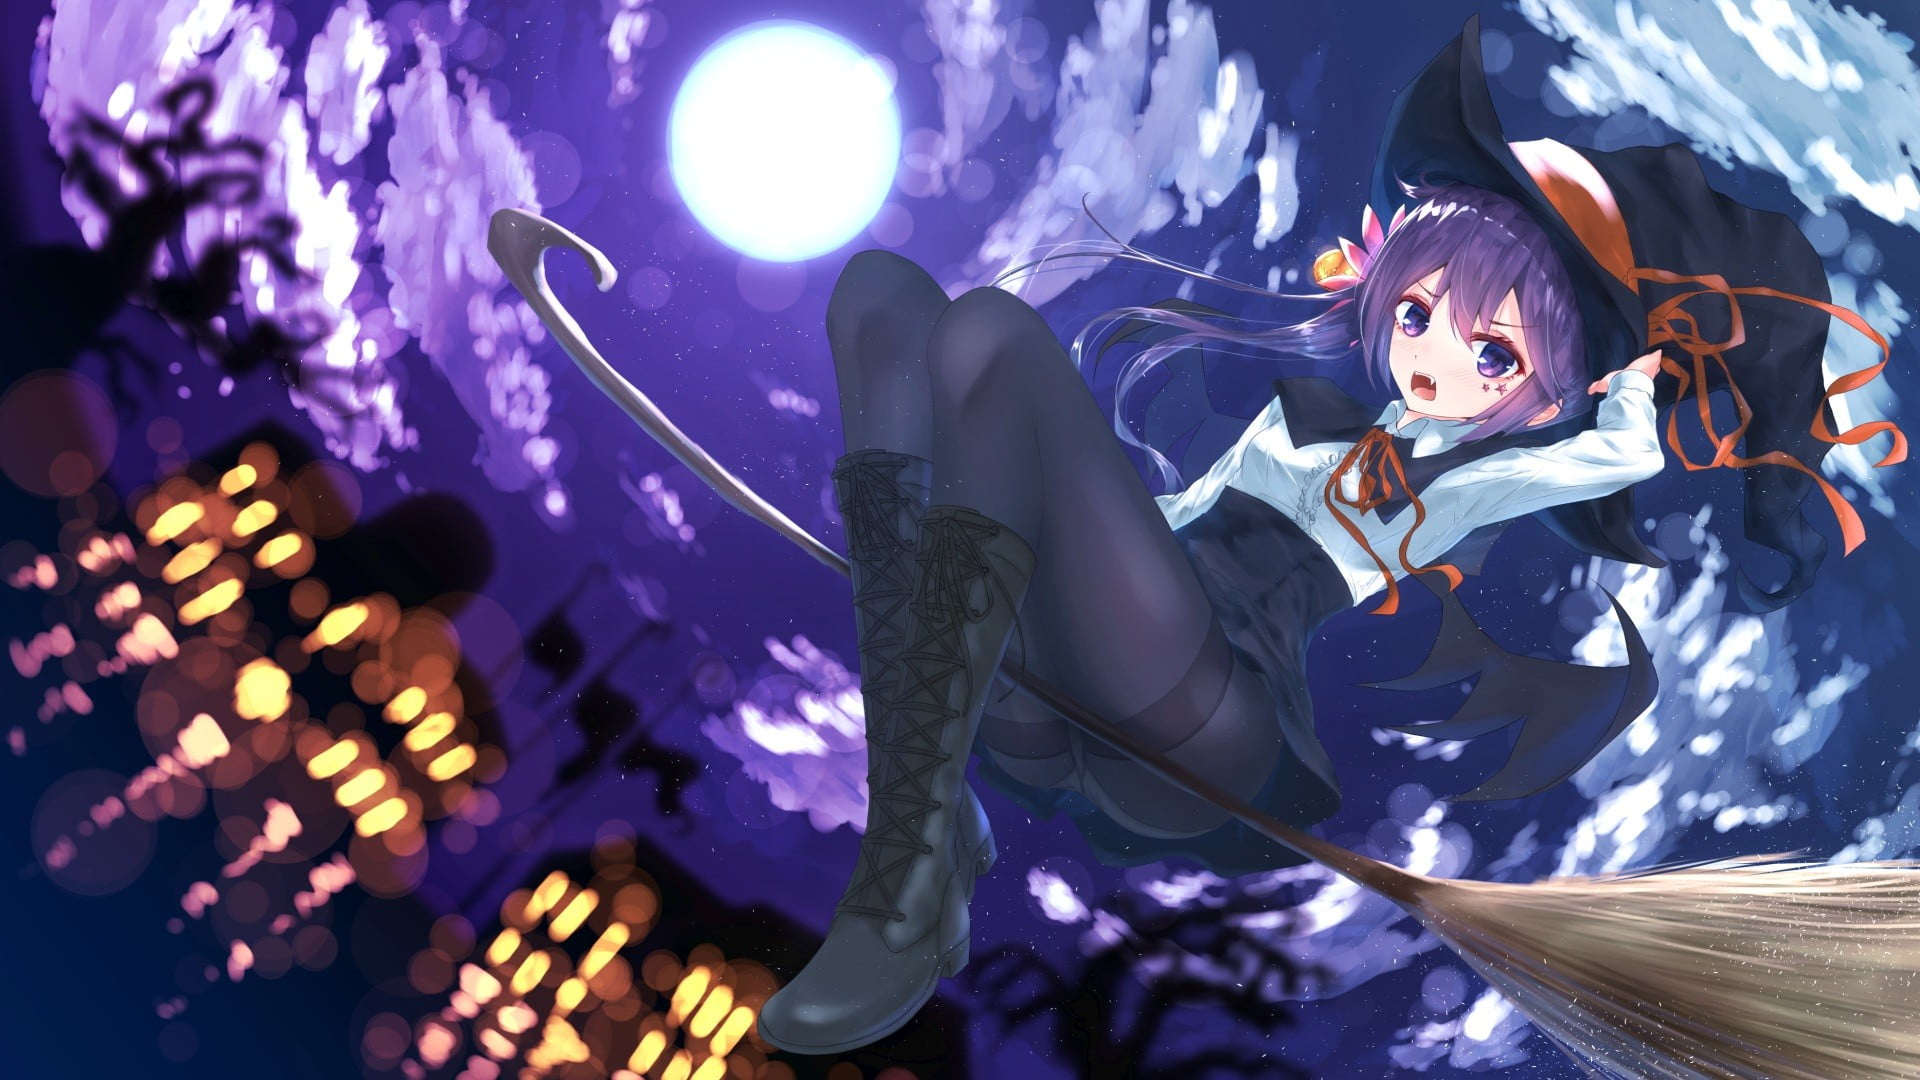 Female Animation Character Riding On Broomstick Graphic Wallpaper